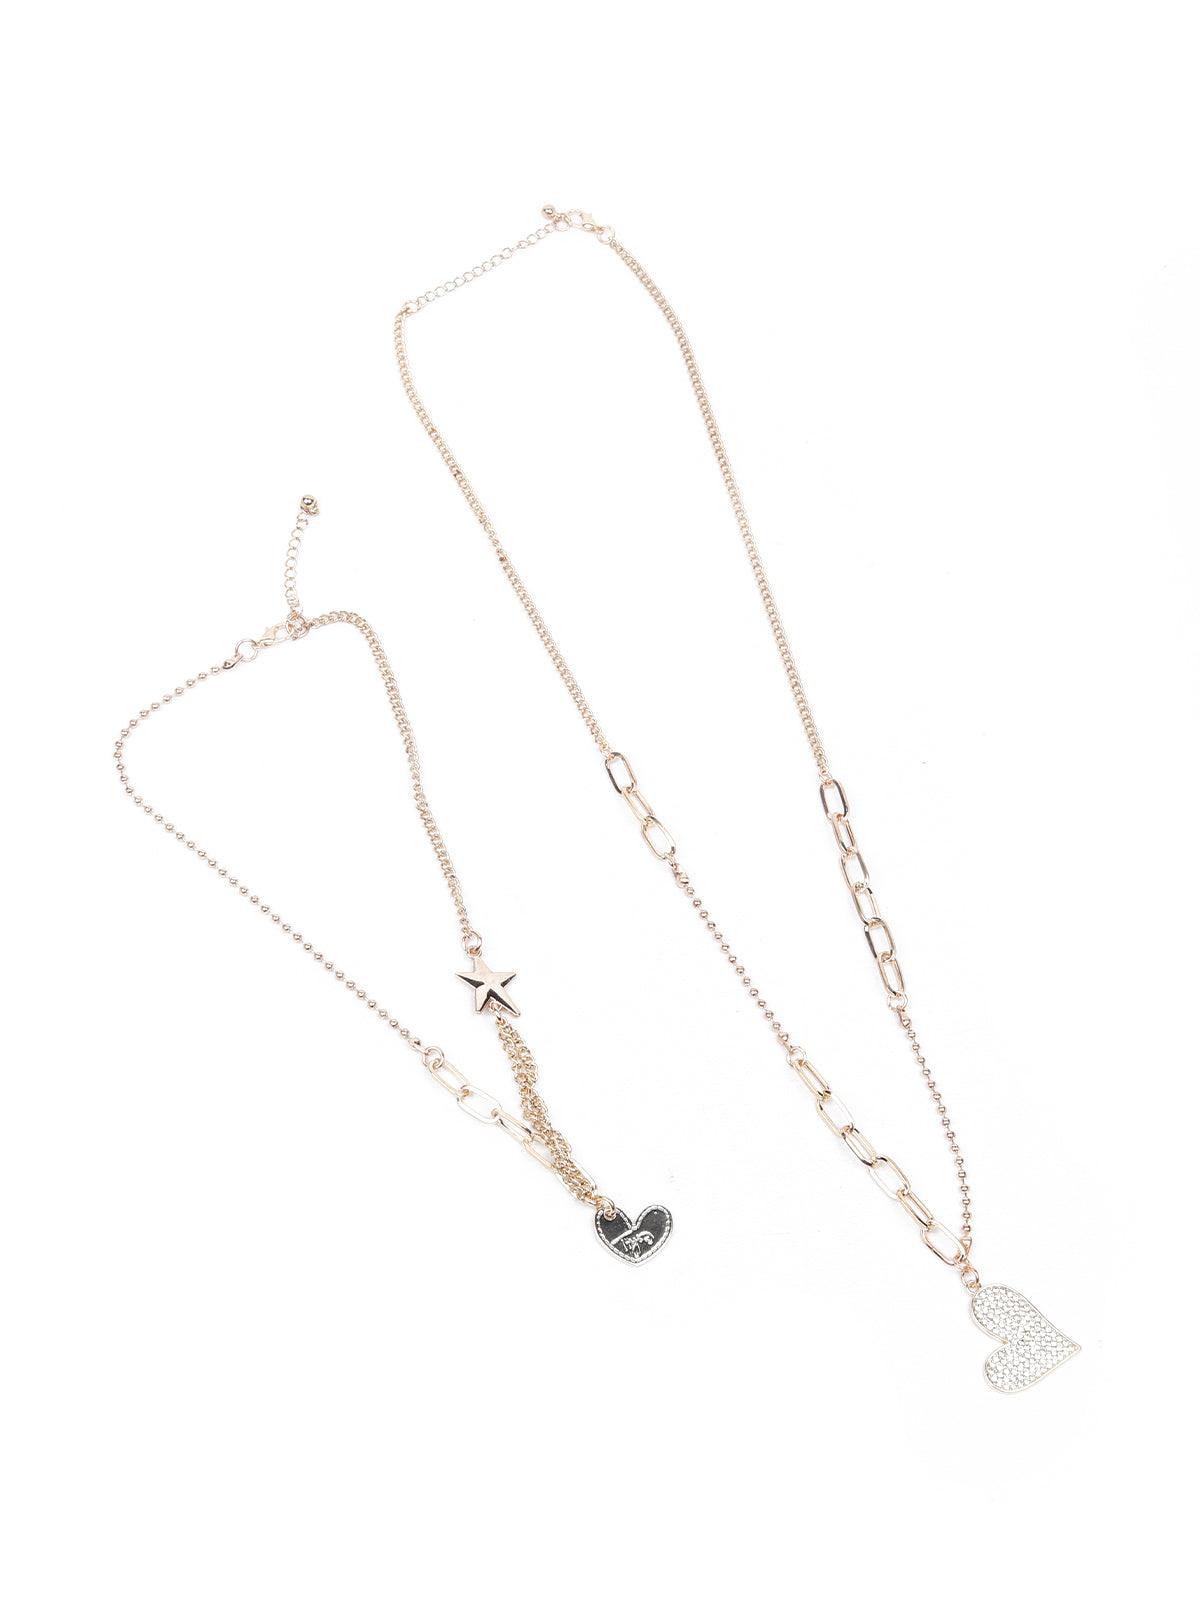 Women's Two-Piece Necklace With A Heart-Shaped Pendant - Odette